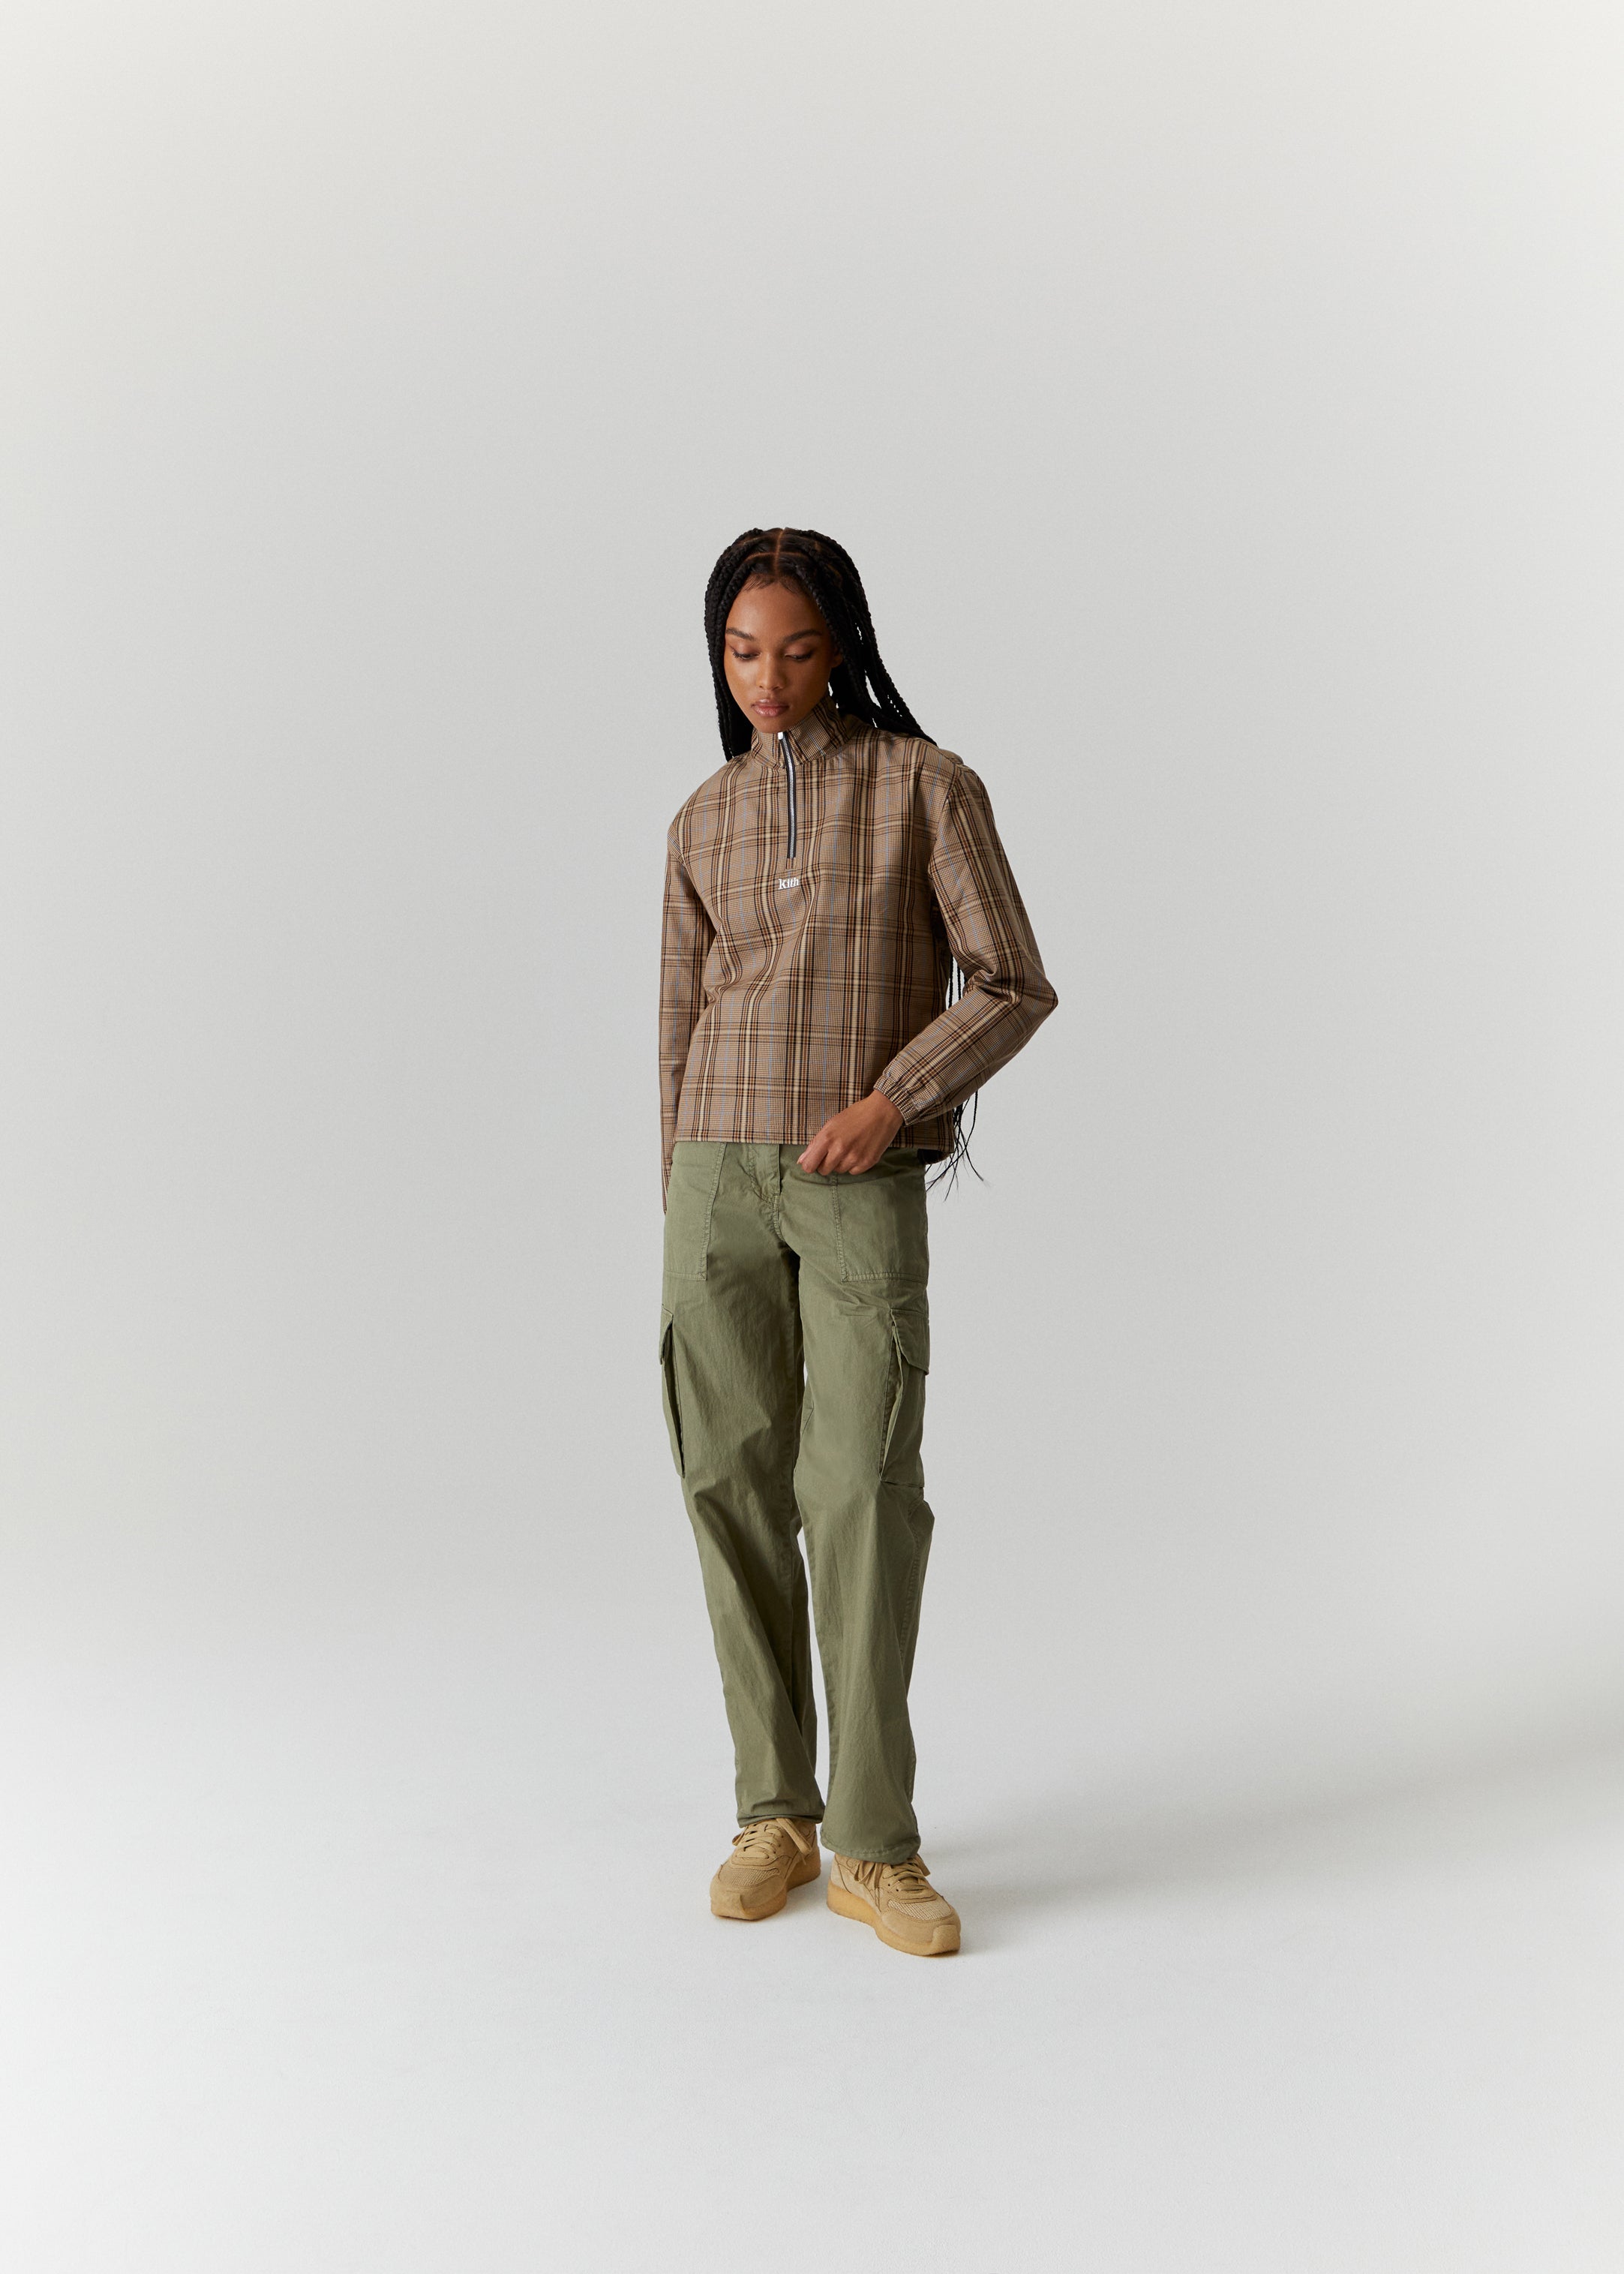 A Look at Kith Women Fall 2022